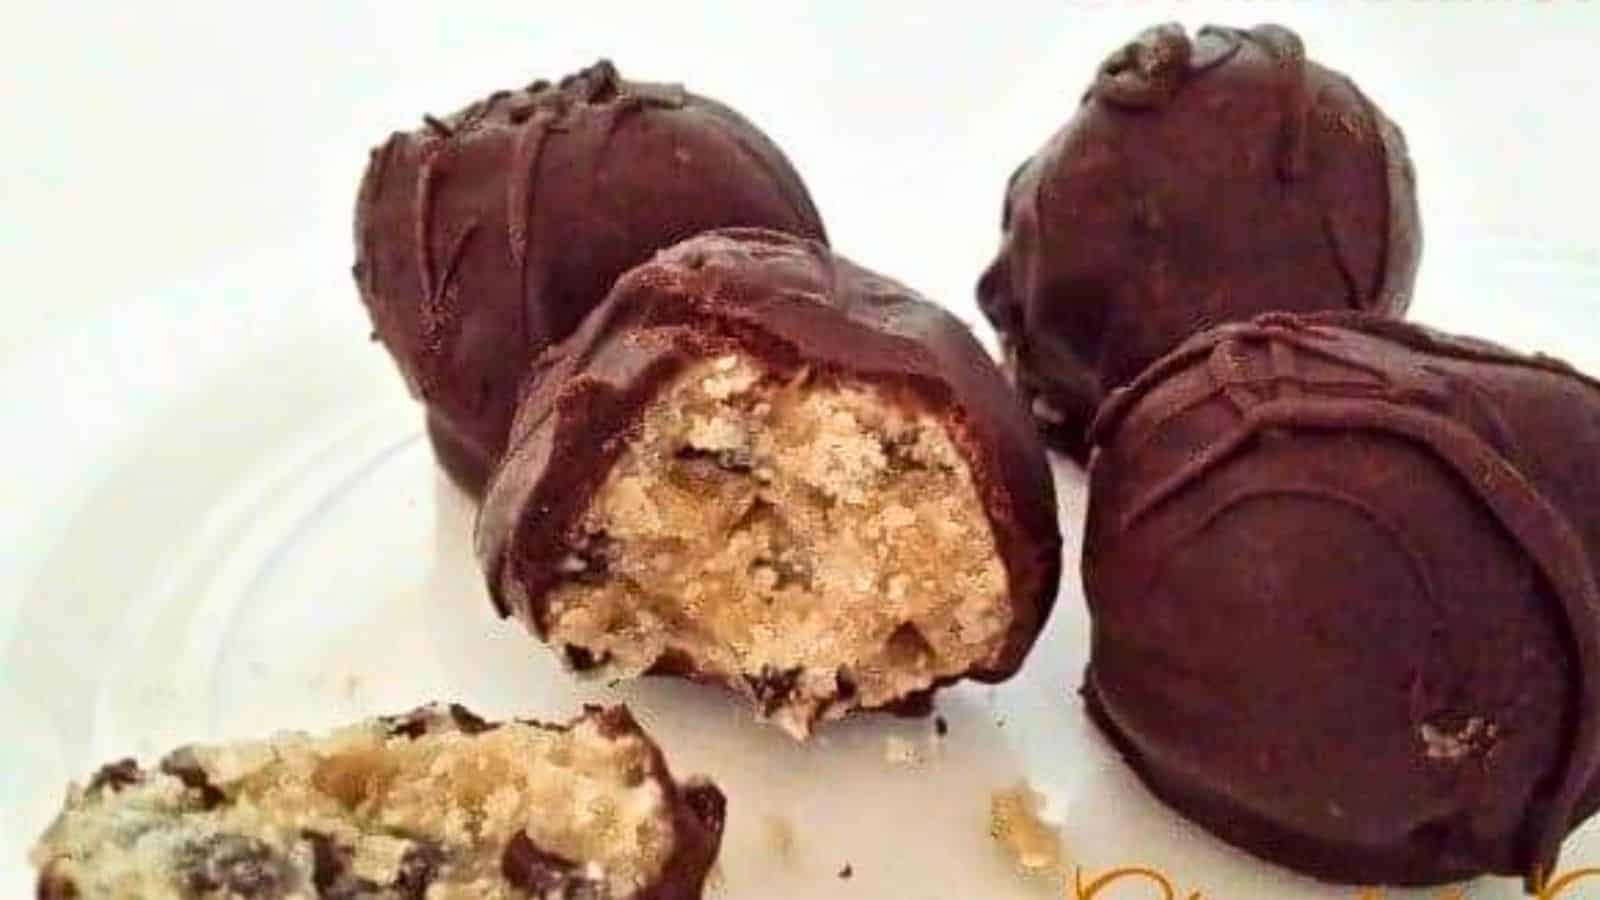 Image shows Chocolate chip cookie dough truffles on a white plate.